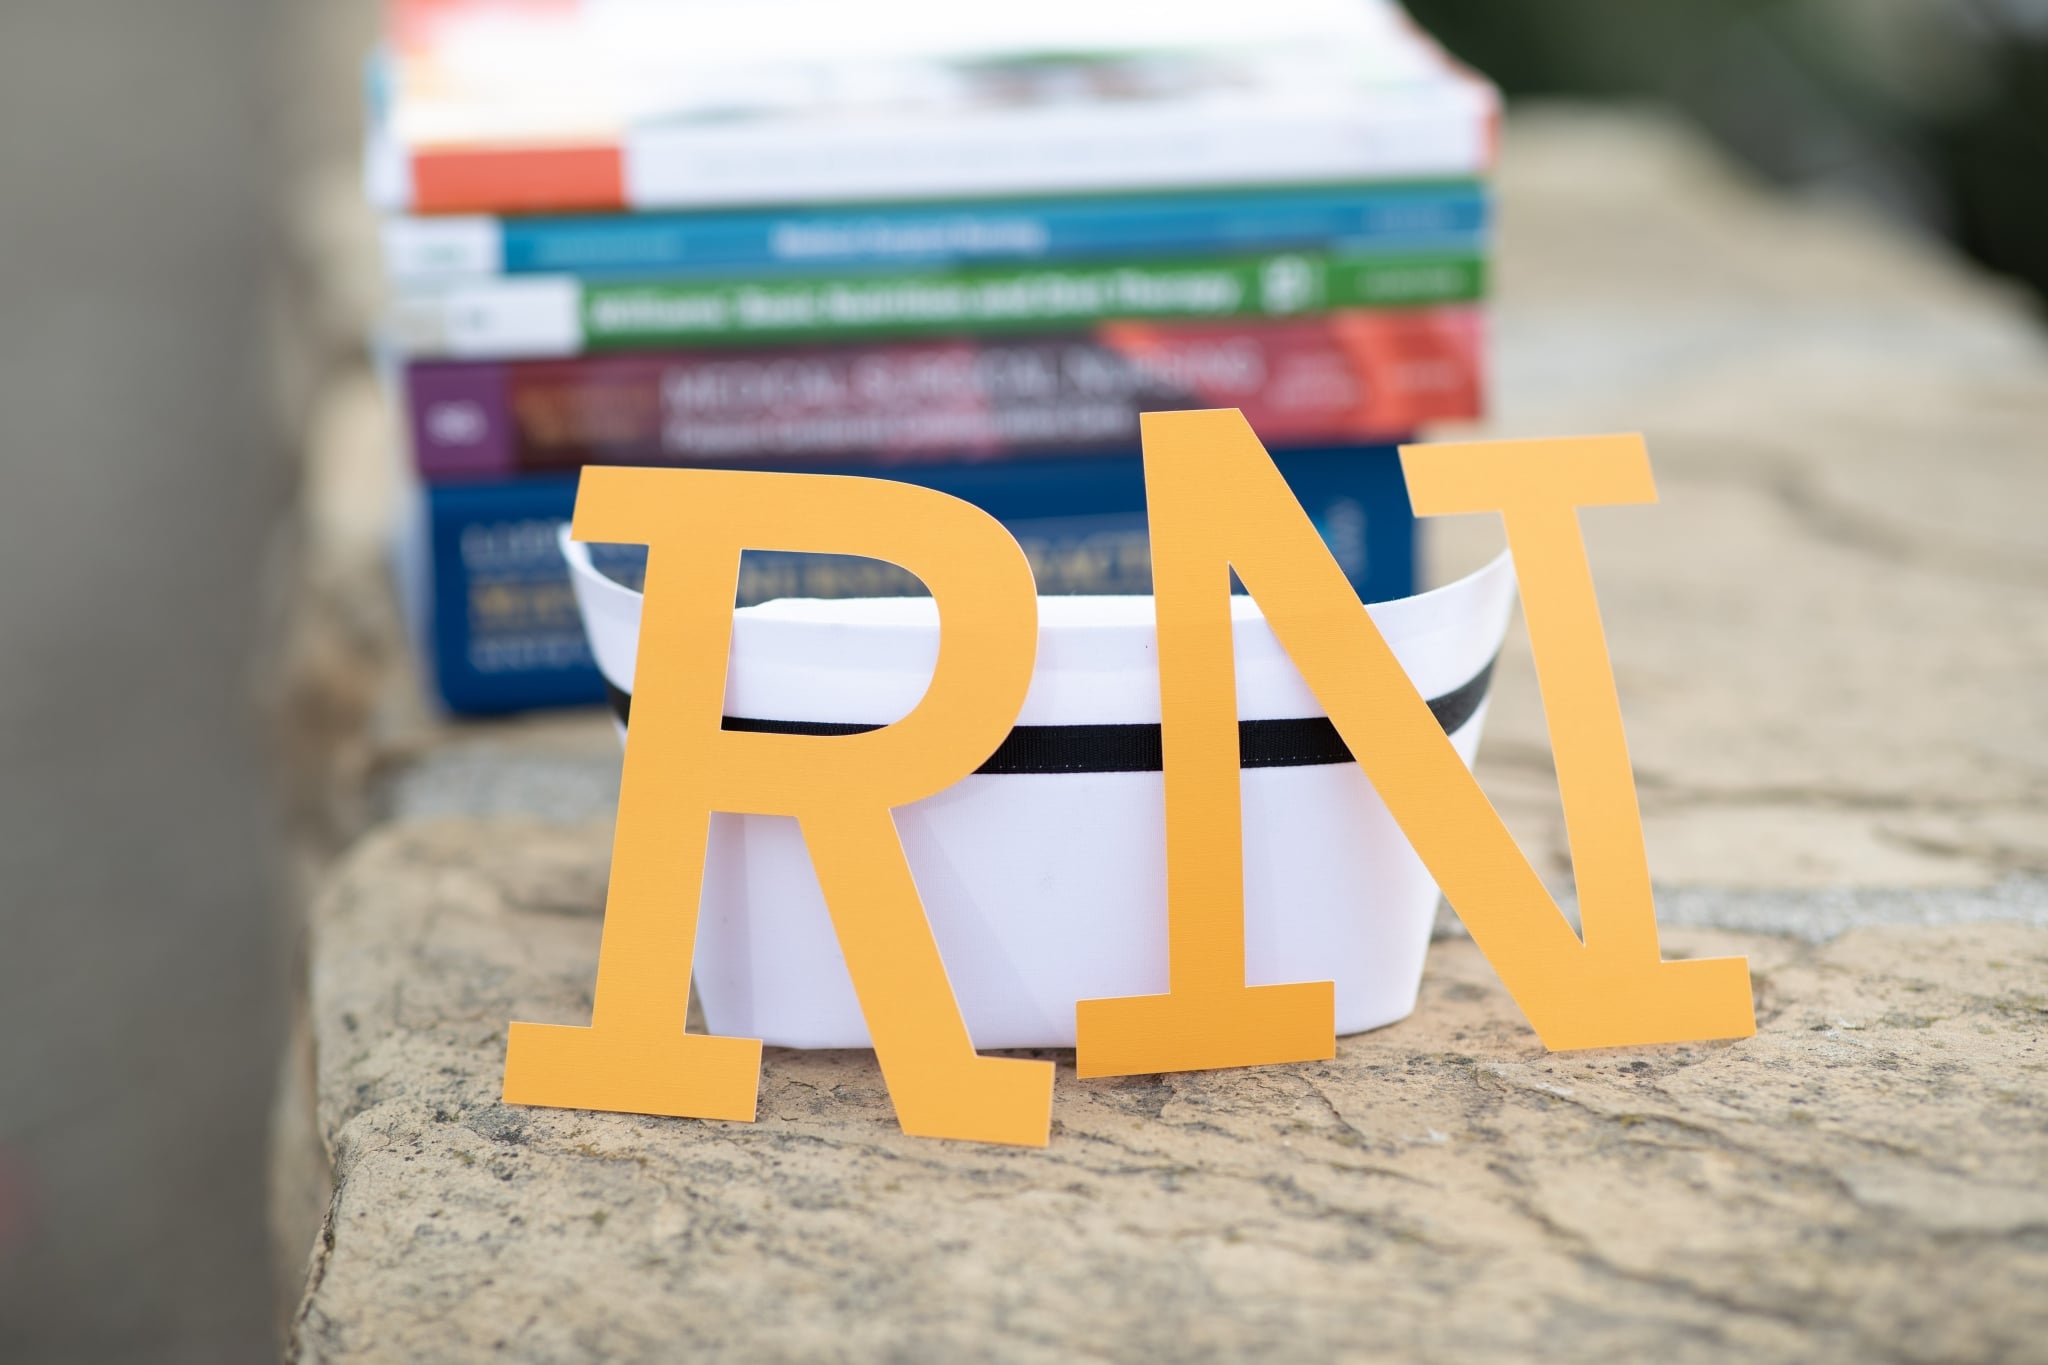 RN-to-BSN Program Books and Signage